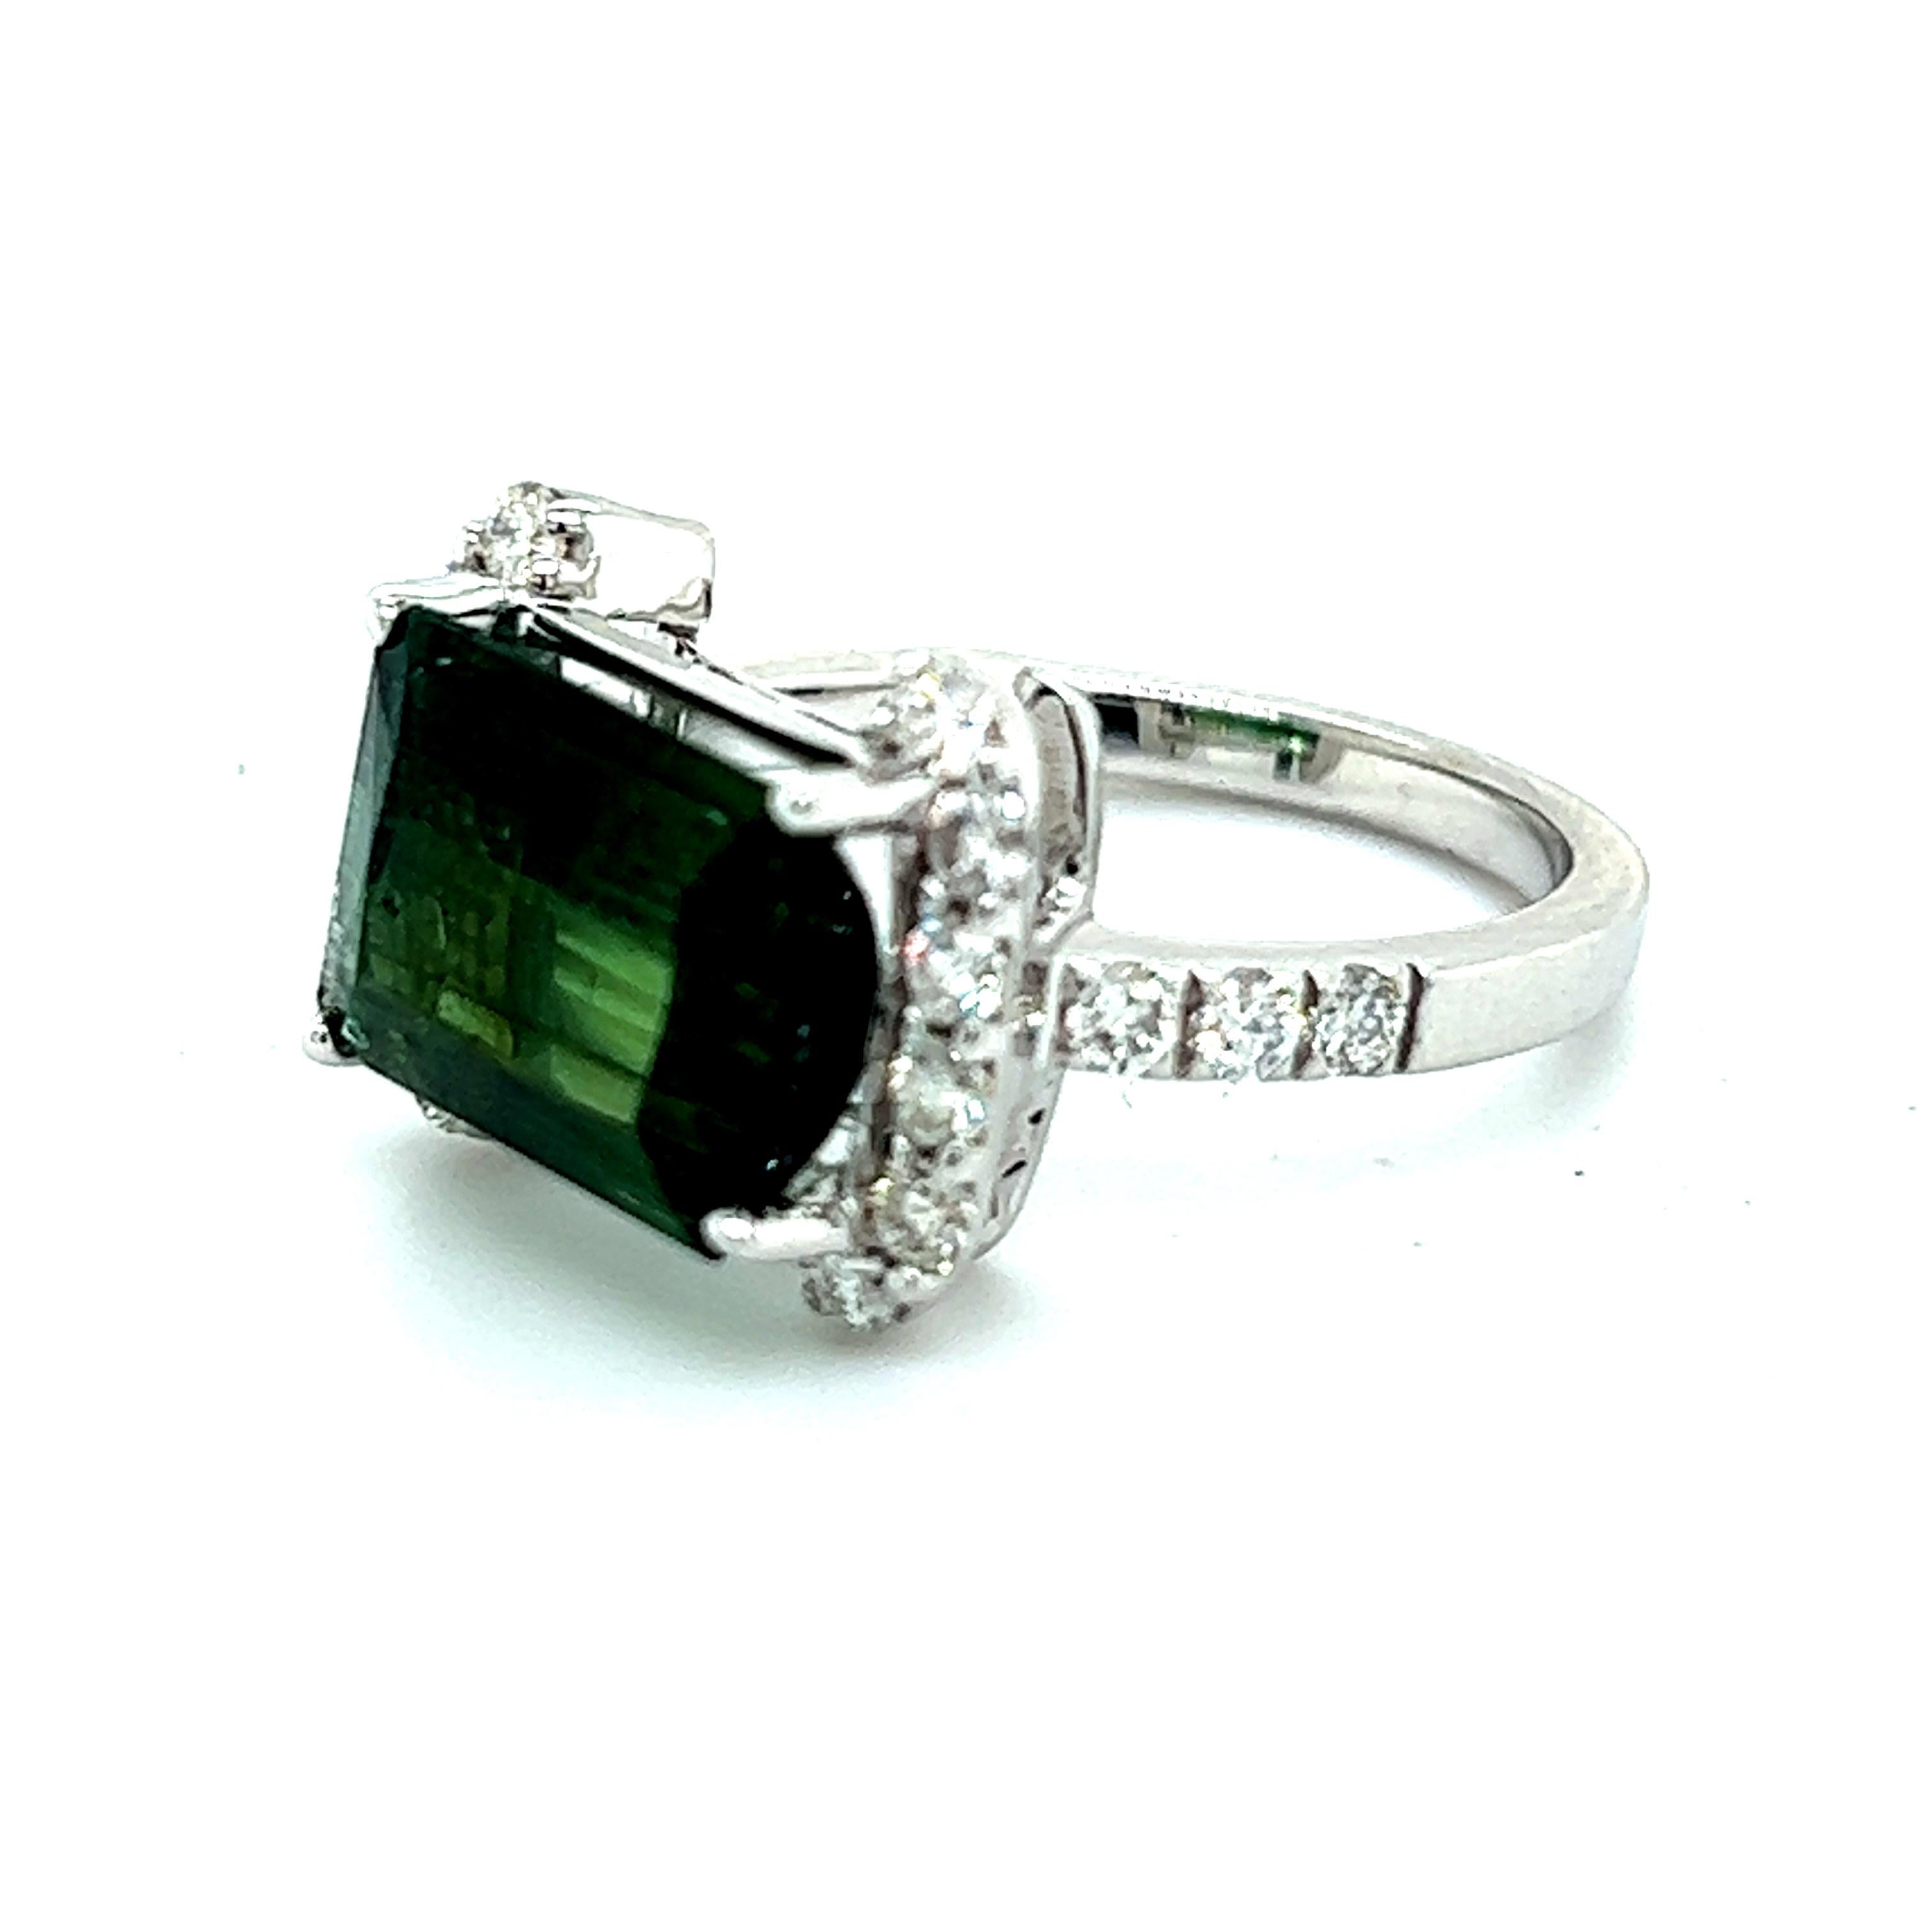 Natural Tourmaline Diamond Ring 14k W Gold 4.2 TCW Certified For Sale 1